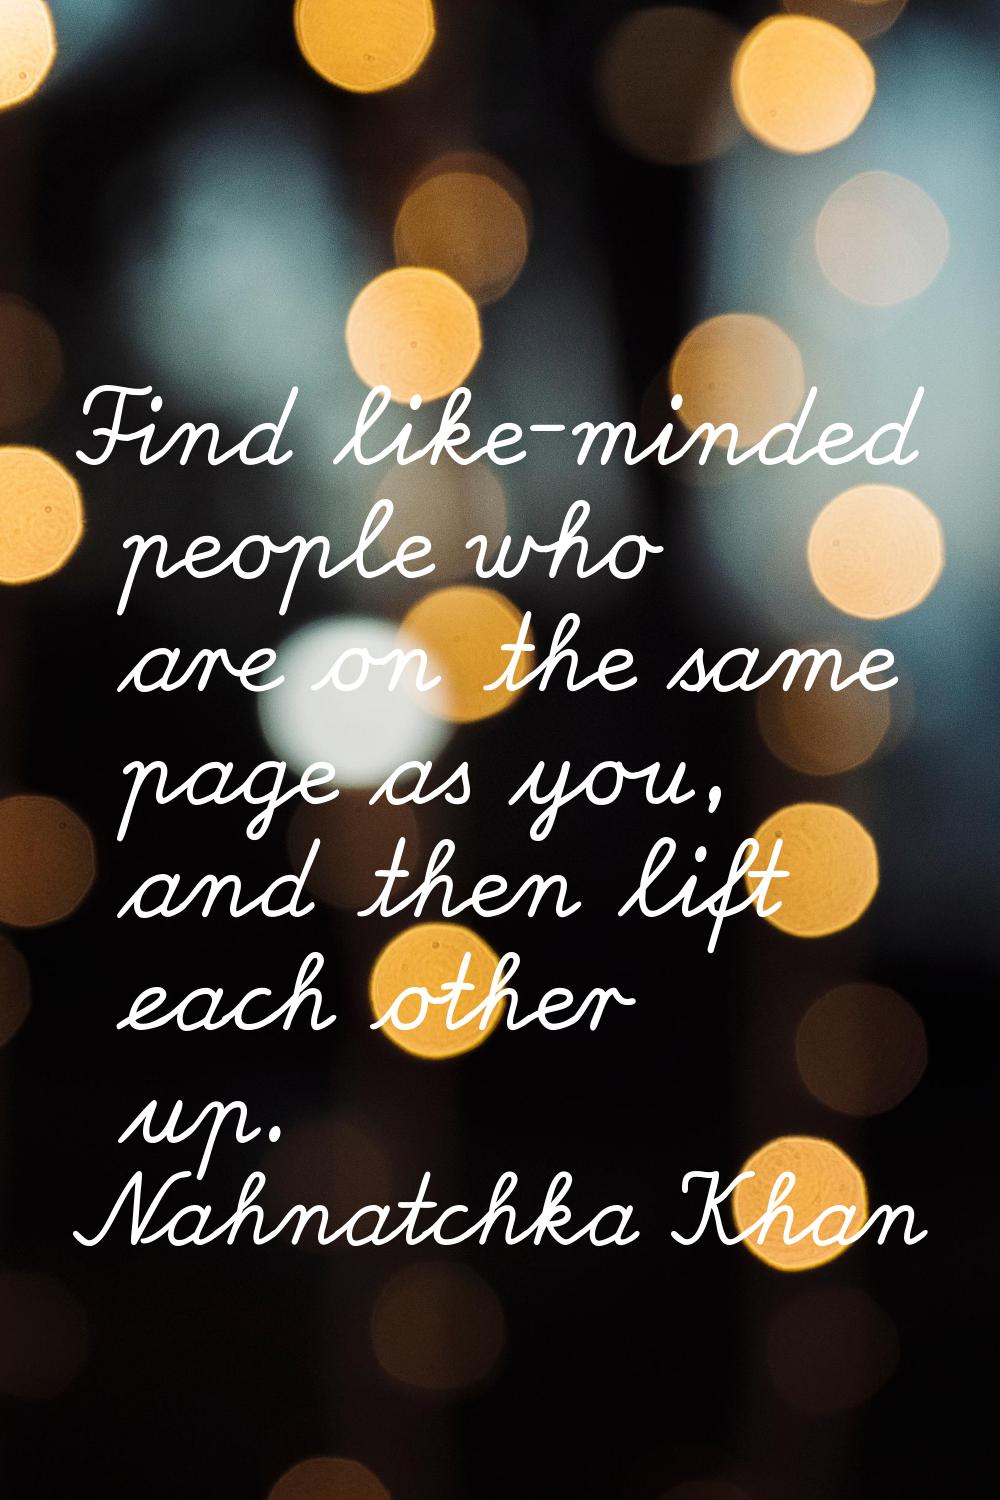 Find like-minded people who are on the same page as you, and then lift each other up.